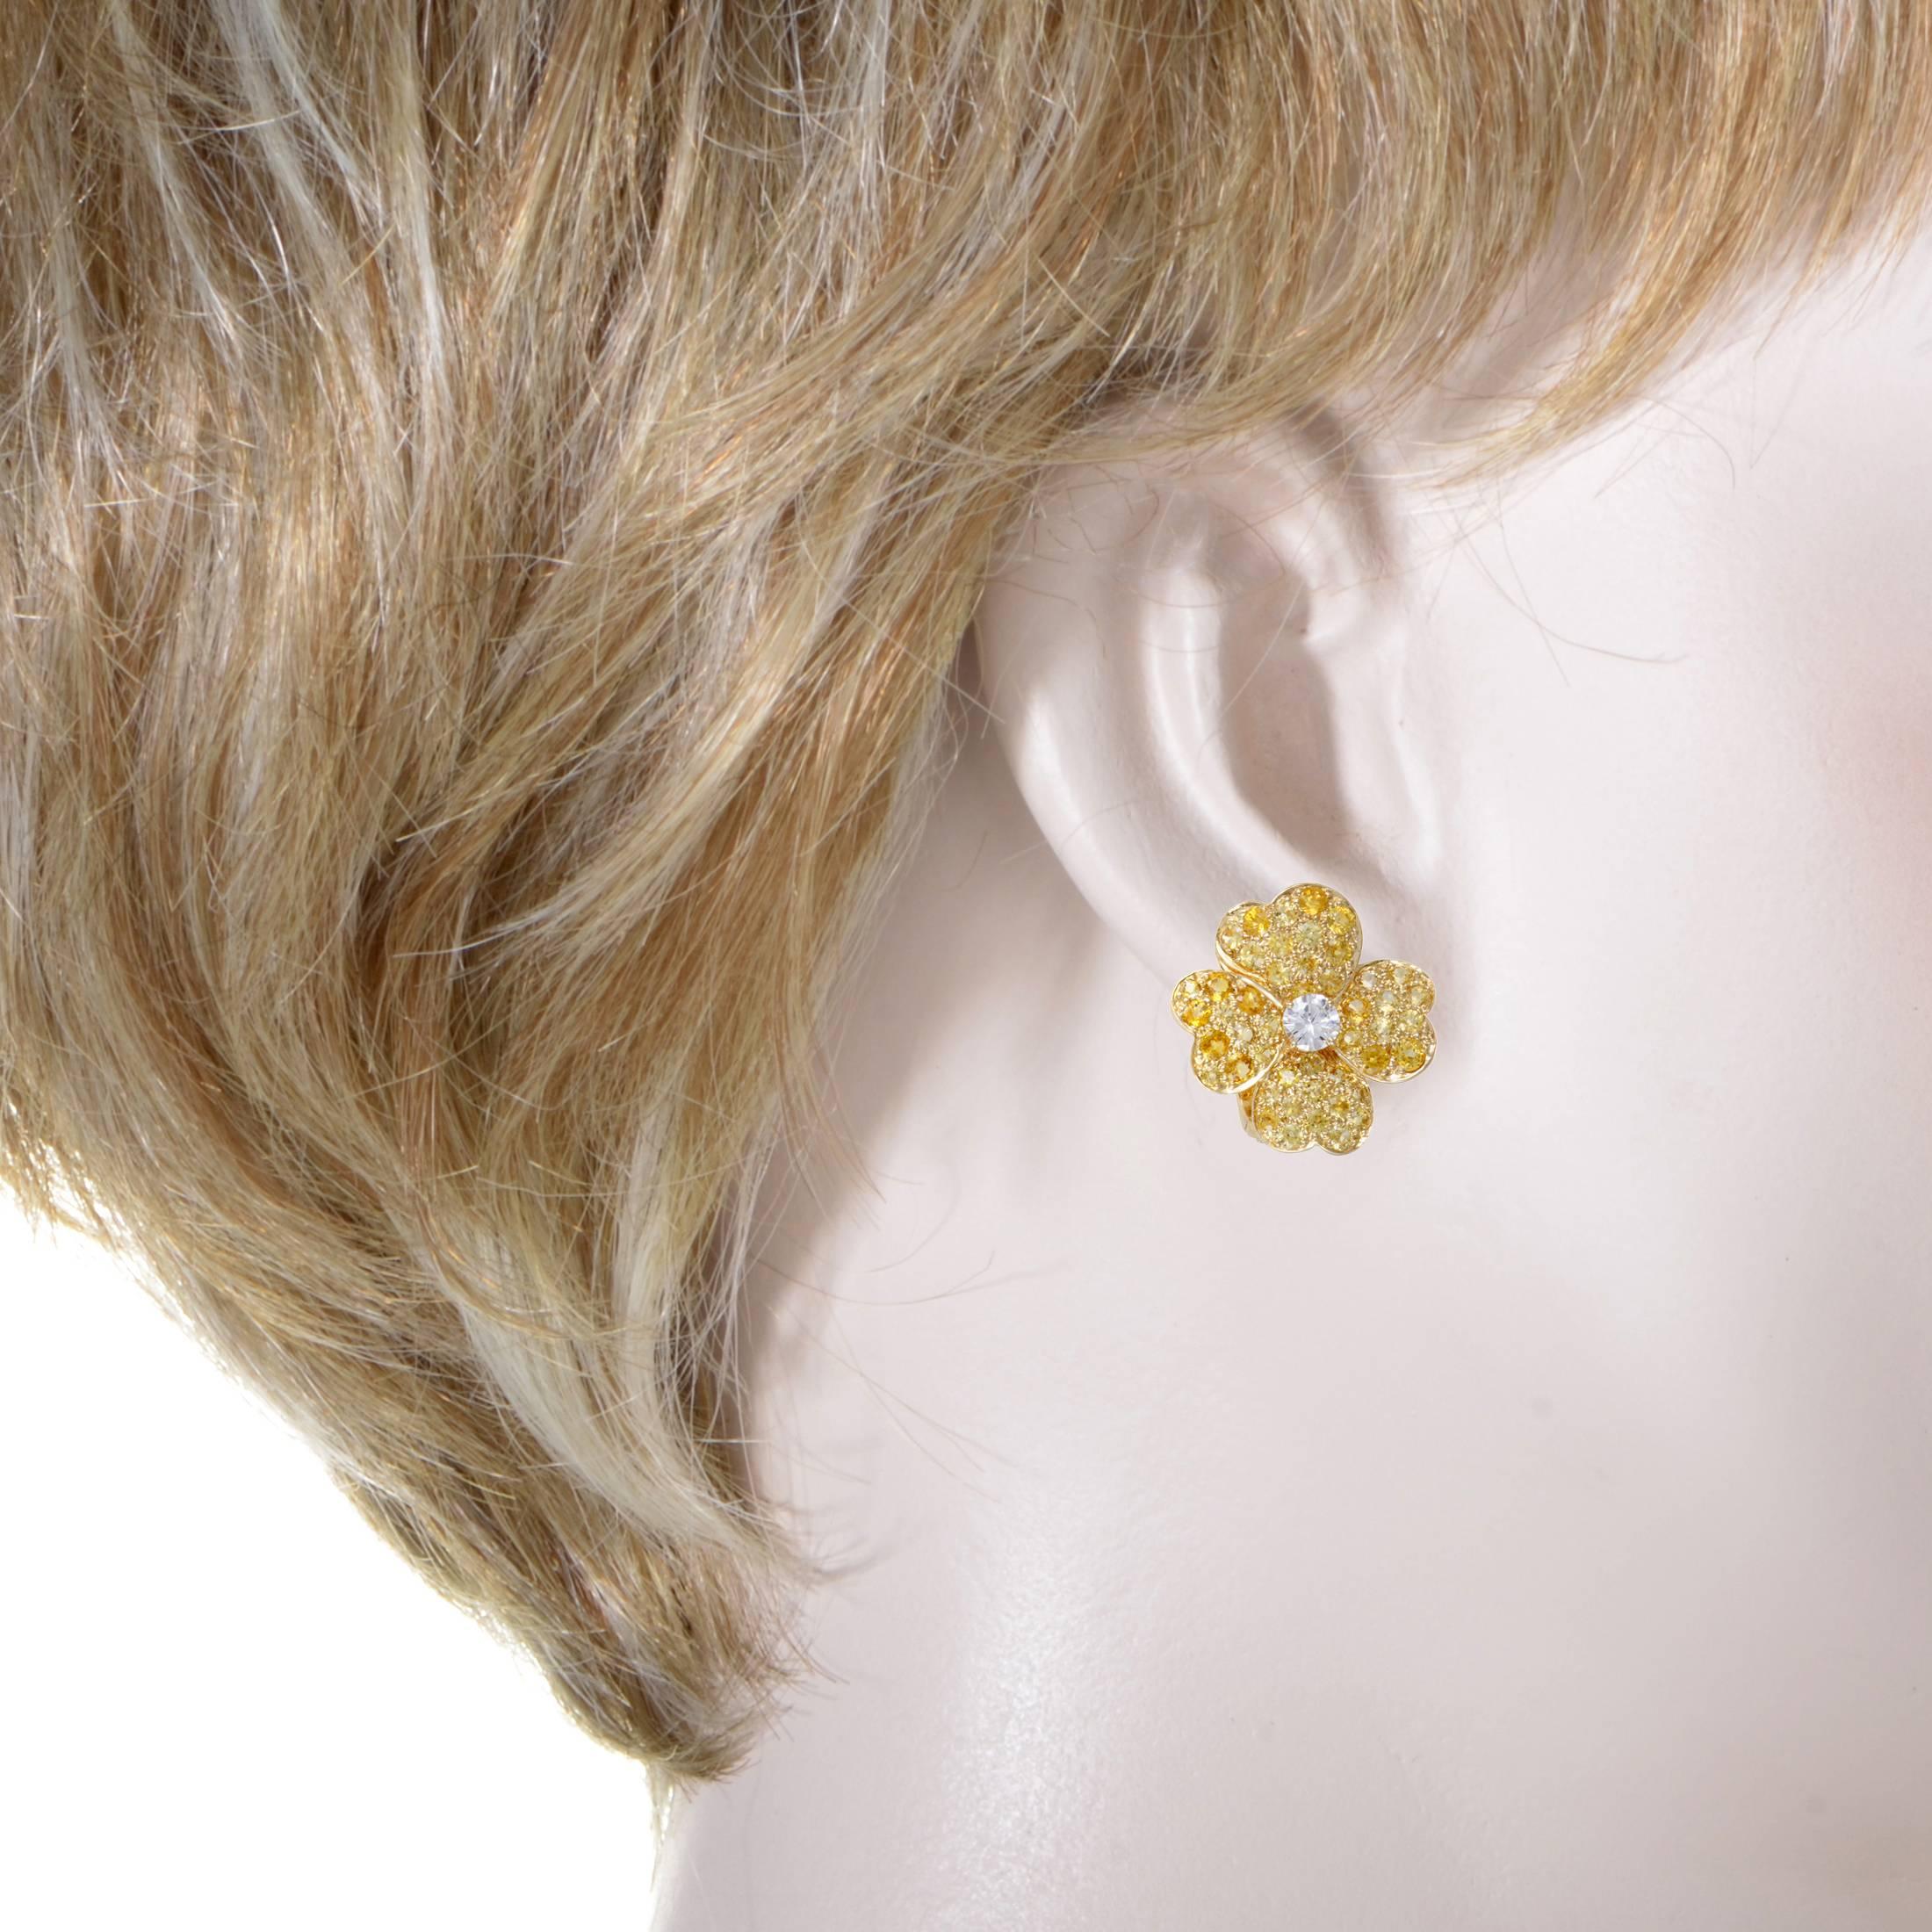 Presented within the sublime "Cosmos" collection, these splendid Van Cleef & Arpels earrings boast a gorgeously feminine appeal. The pair is made of attractive 18K yellow gold and lavishly set with diamonds and yellow